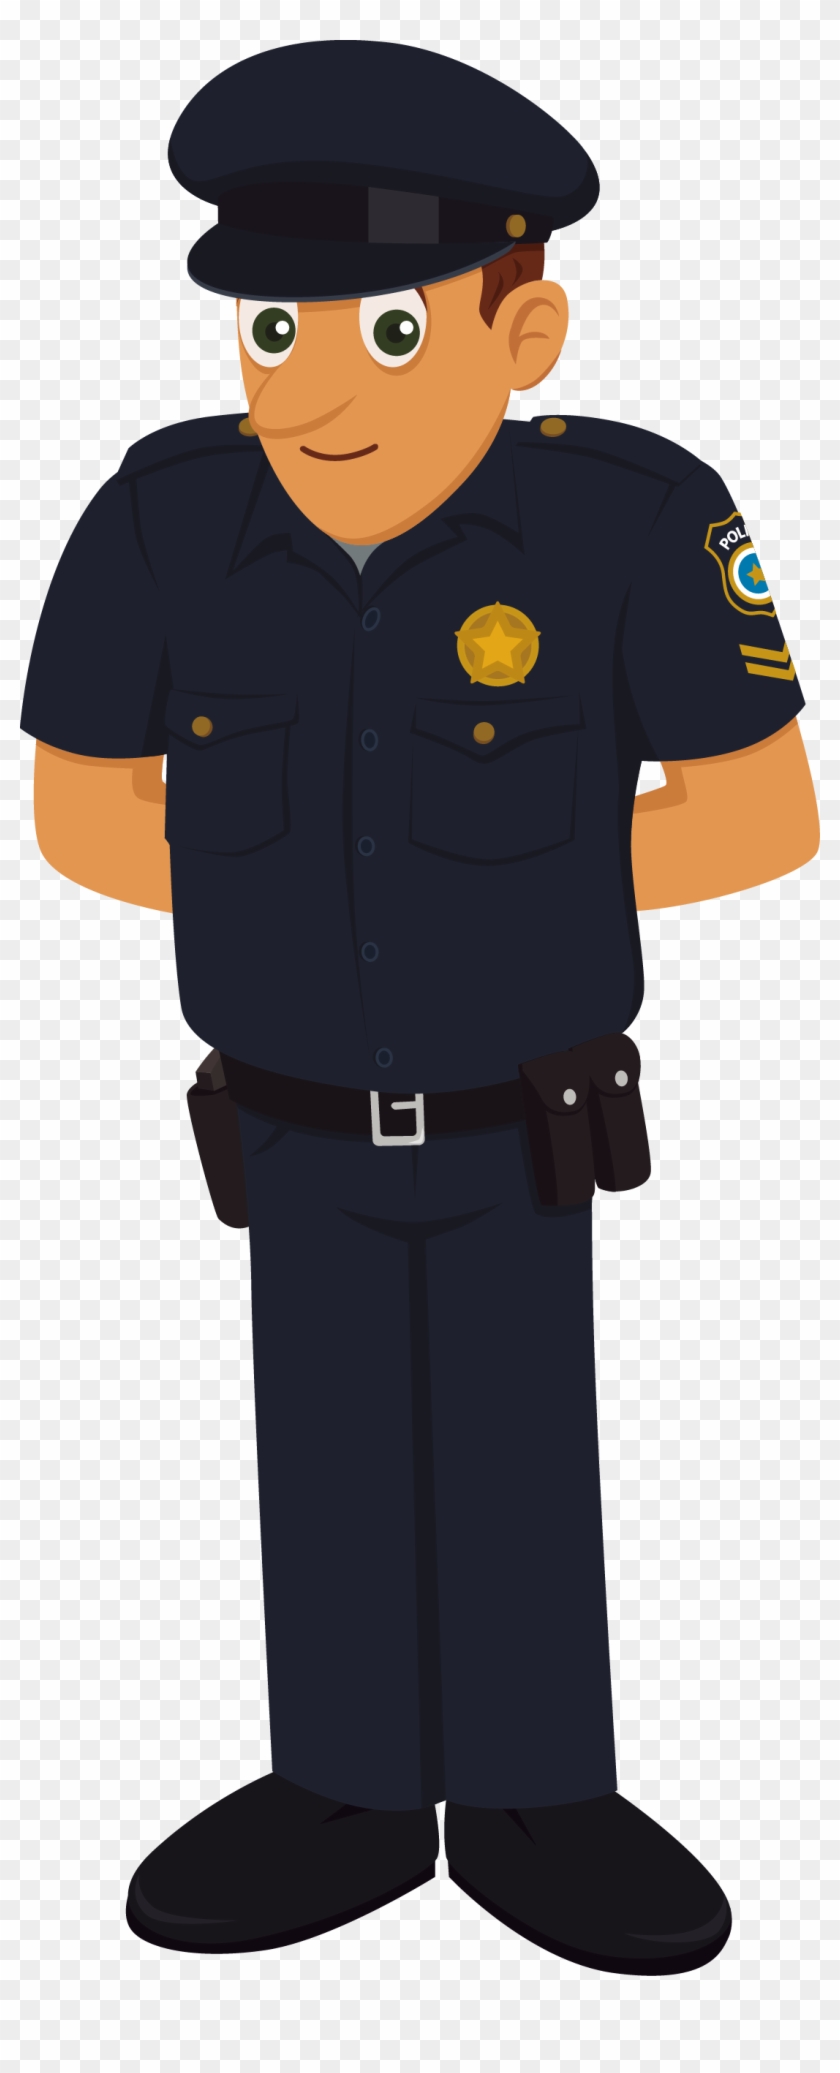 Police Officer Police Uniforms Of The United States - Police Officer Character Png #990539